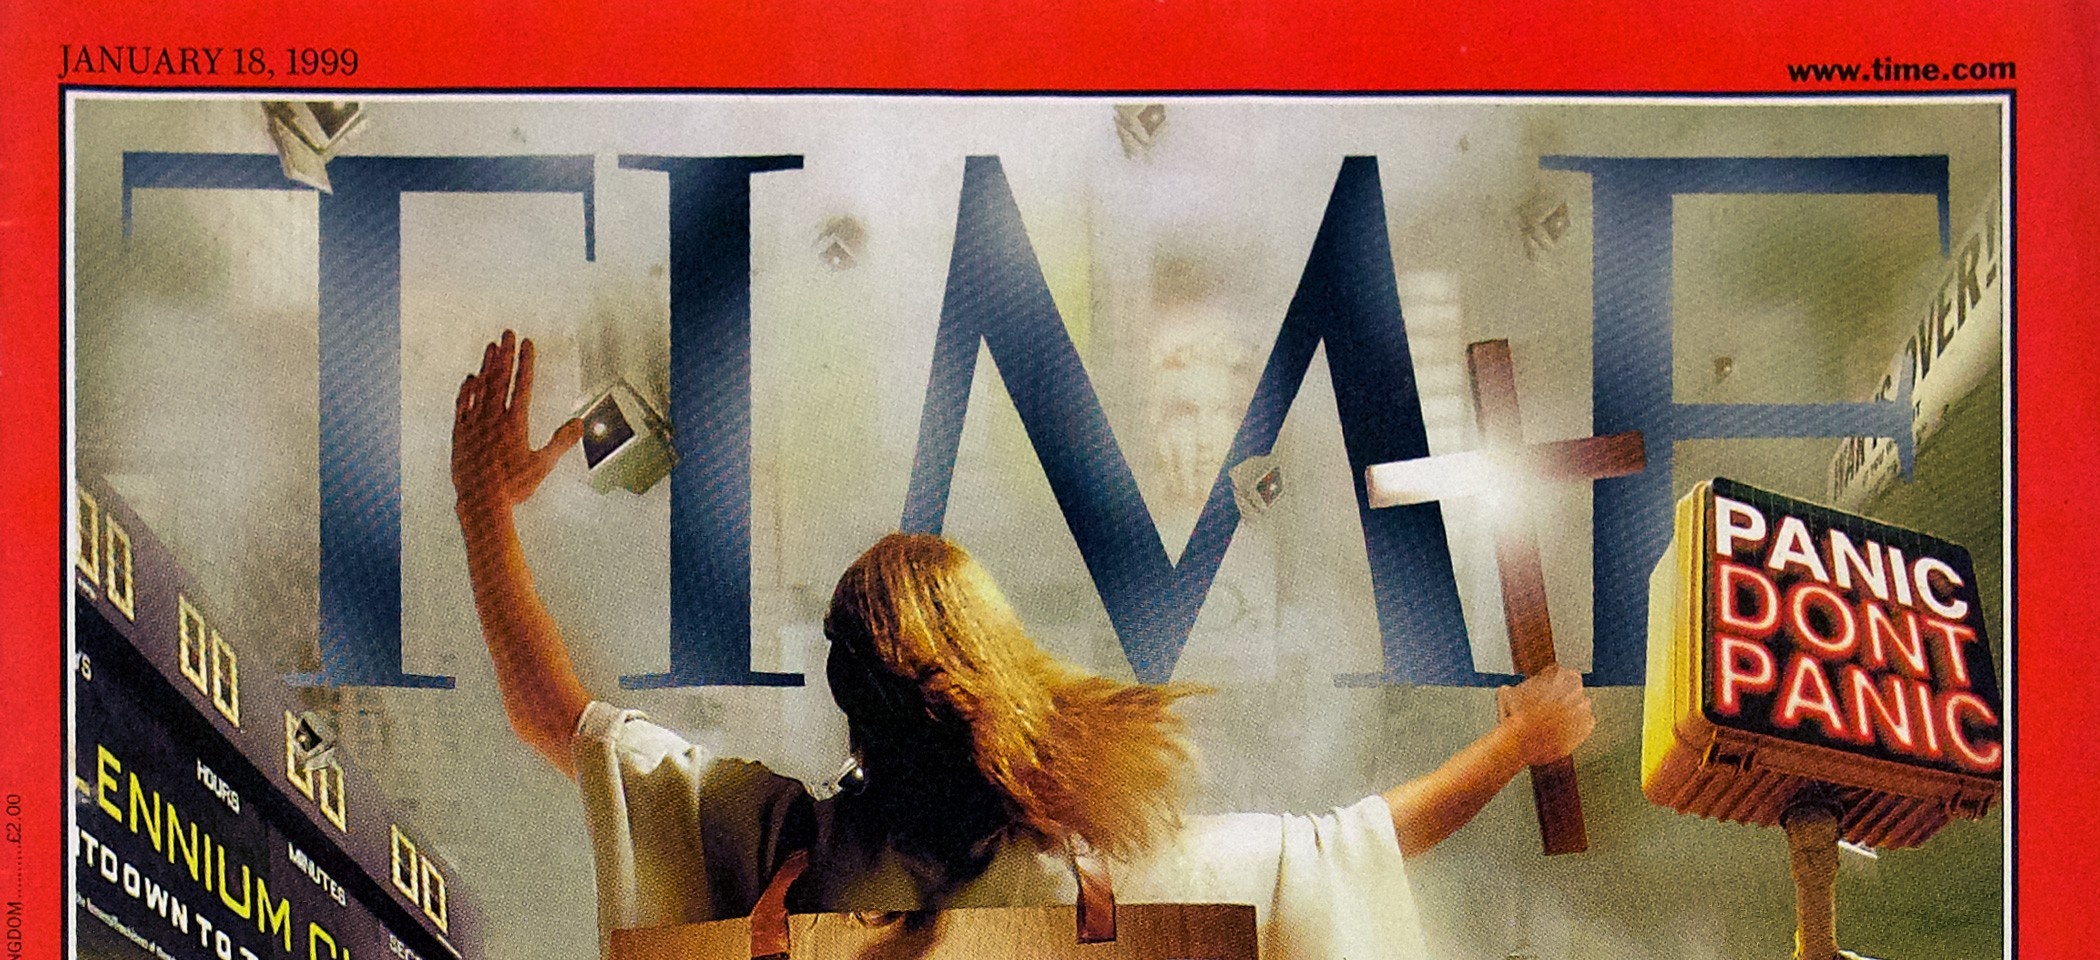 The top portion of the cover of Time magazine from 1999 with computers falling from the sky